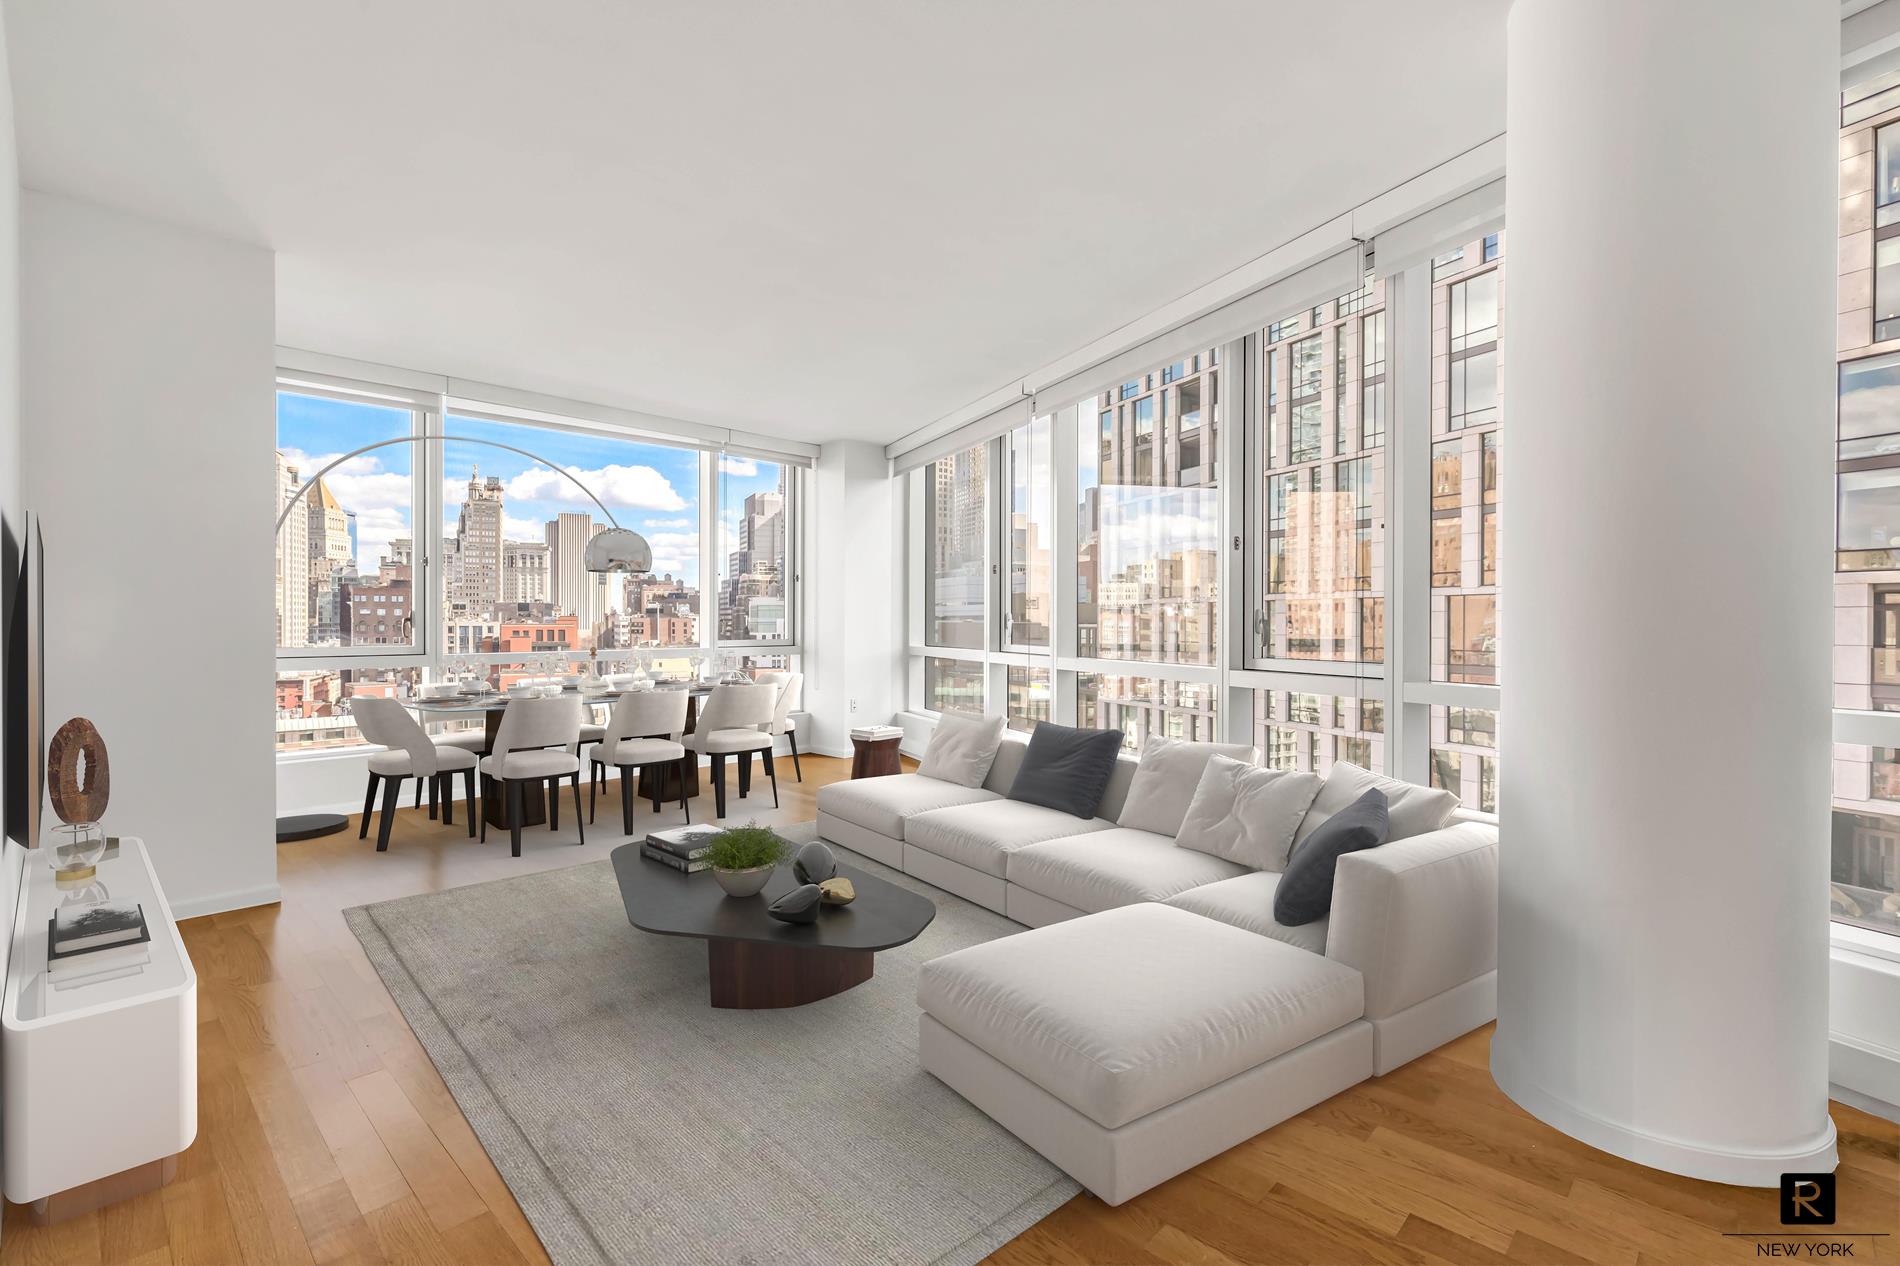 200 Chambers Street 16-G, Tribeca, Downtown, NYC - 2 Bedrooms  
2.5 Bathrooms  
4 Rooms - 